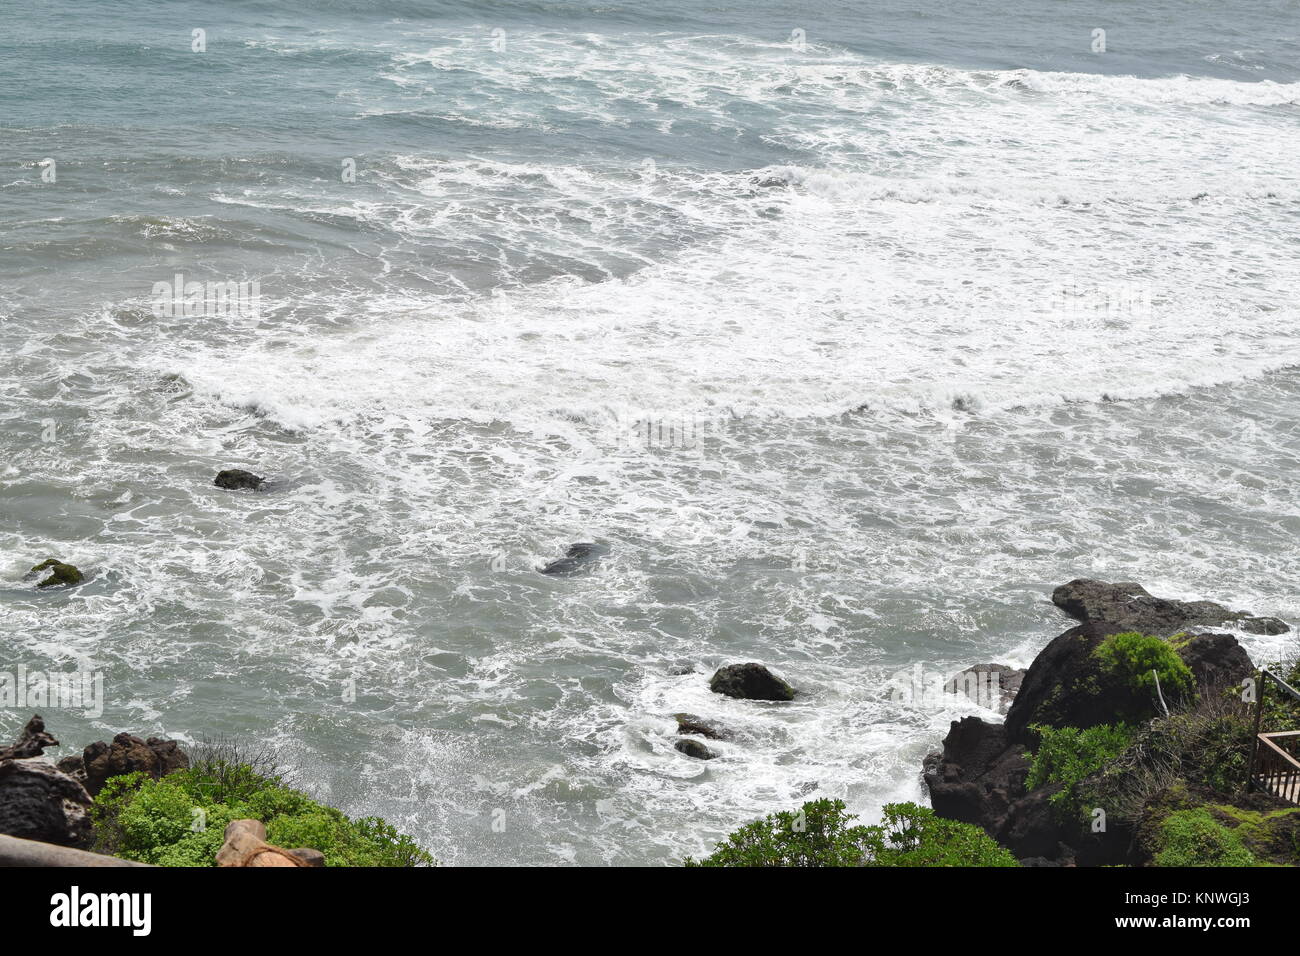 Sea view from mountain. Sea, trees and mountain. Rocky sea view with coconut trees in side. Sea surrounded by greenery and mountains. Stock Photo